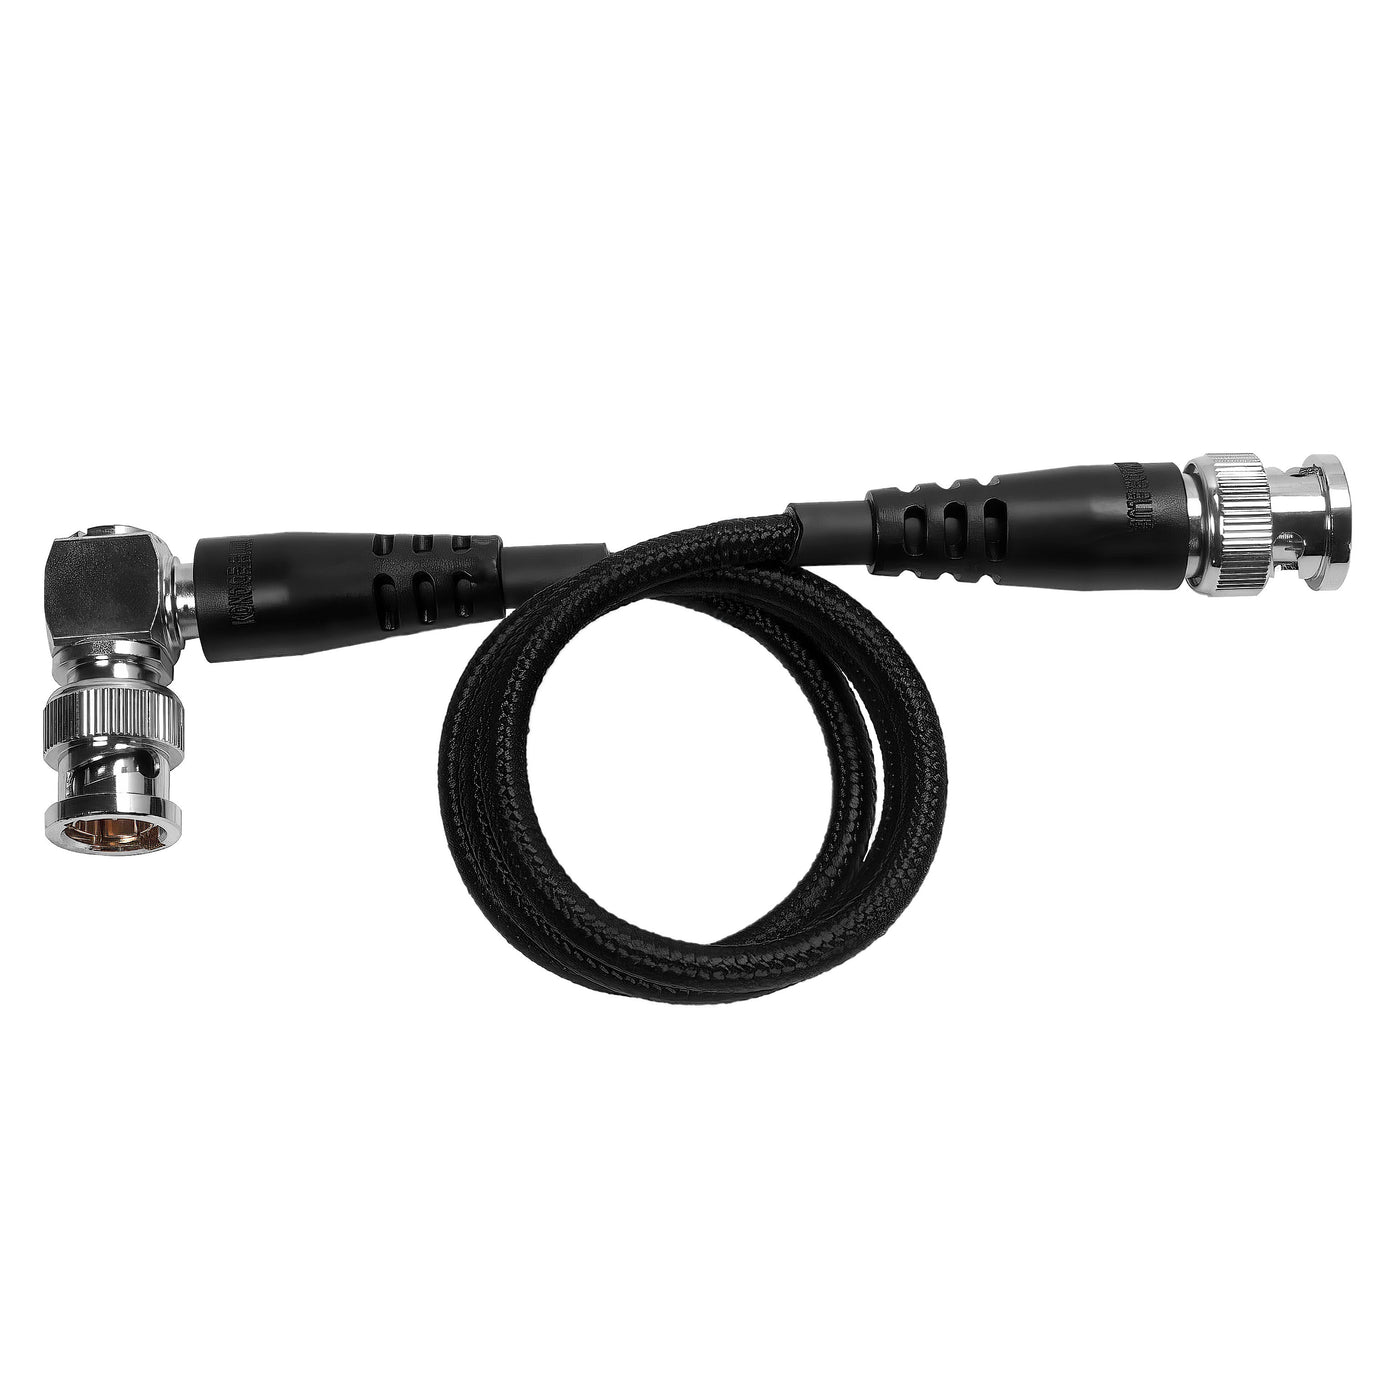 20" 12G SDI Straight to Right Angle Cable for 4K 60p Camera Monitors and Transmitters